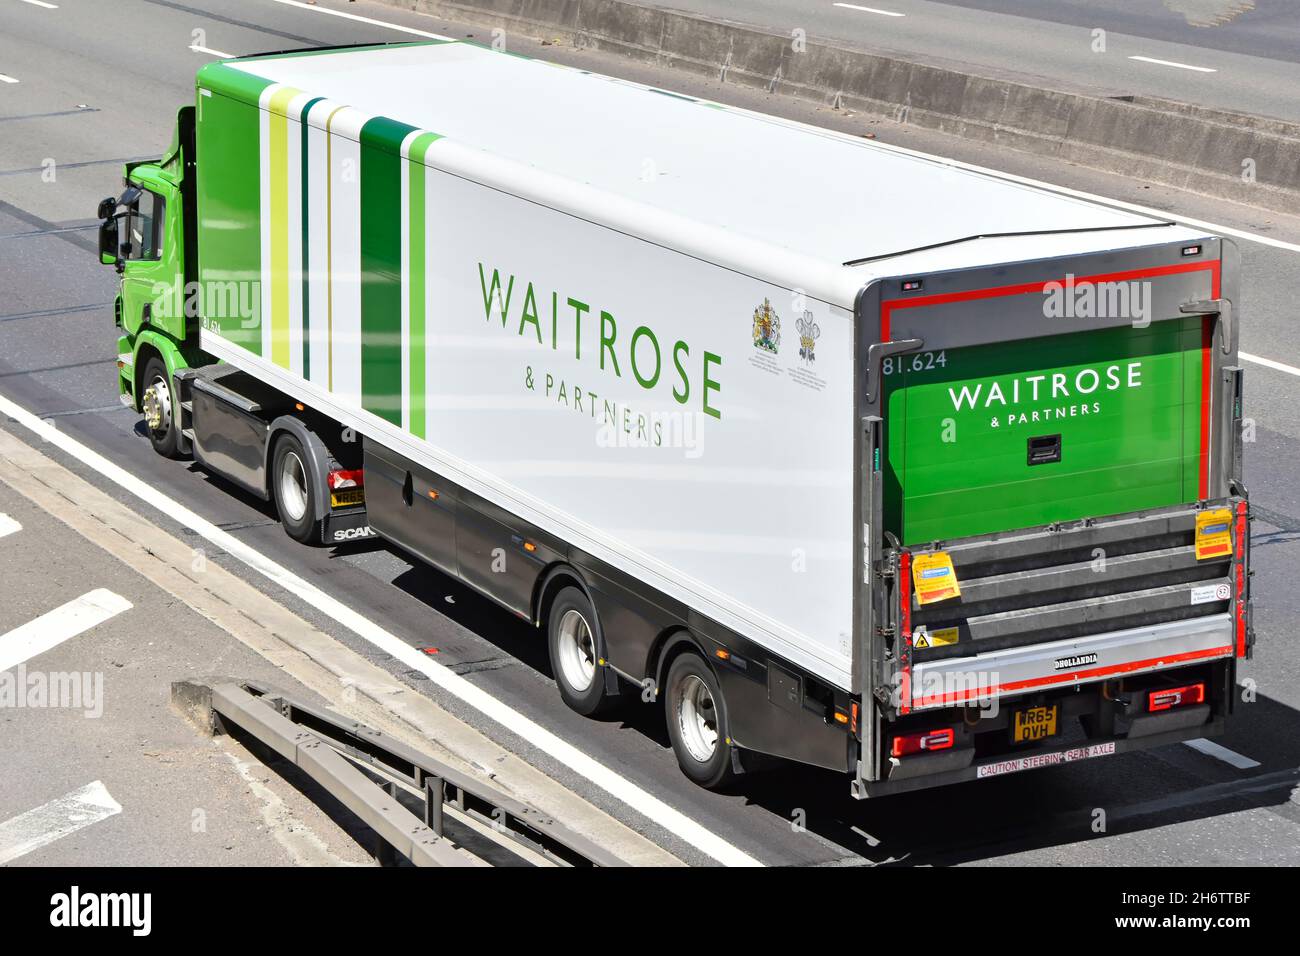 Aerial side & back view of Waitrose retail online business supermarket food supply chain store delivery lorry truck & trailer driving on UK motorway Stock Photo